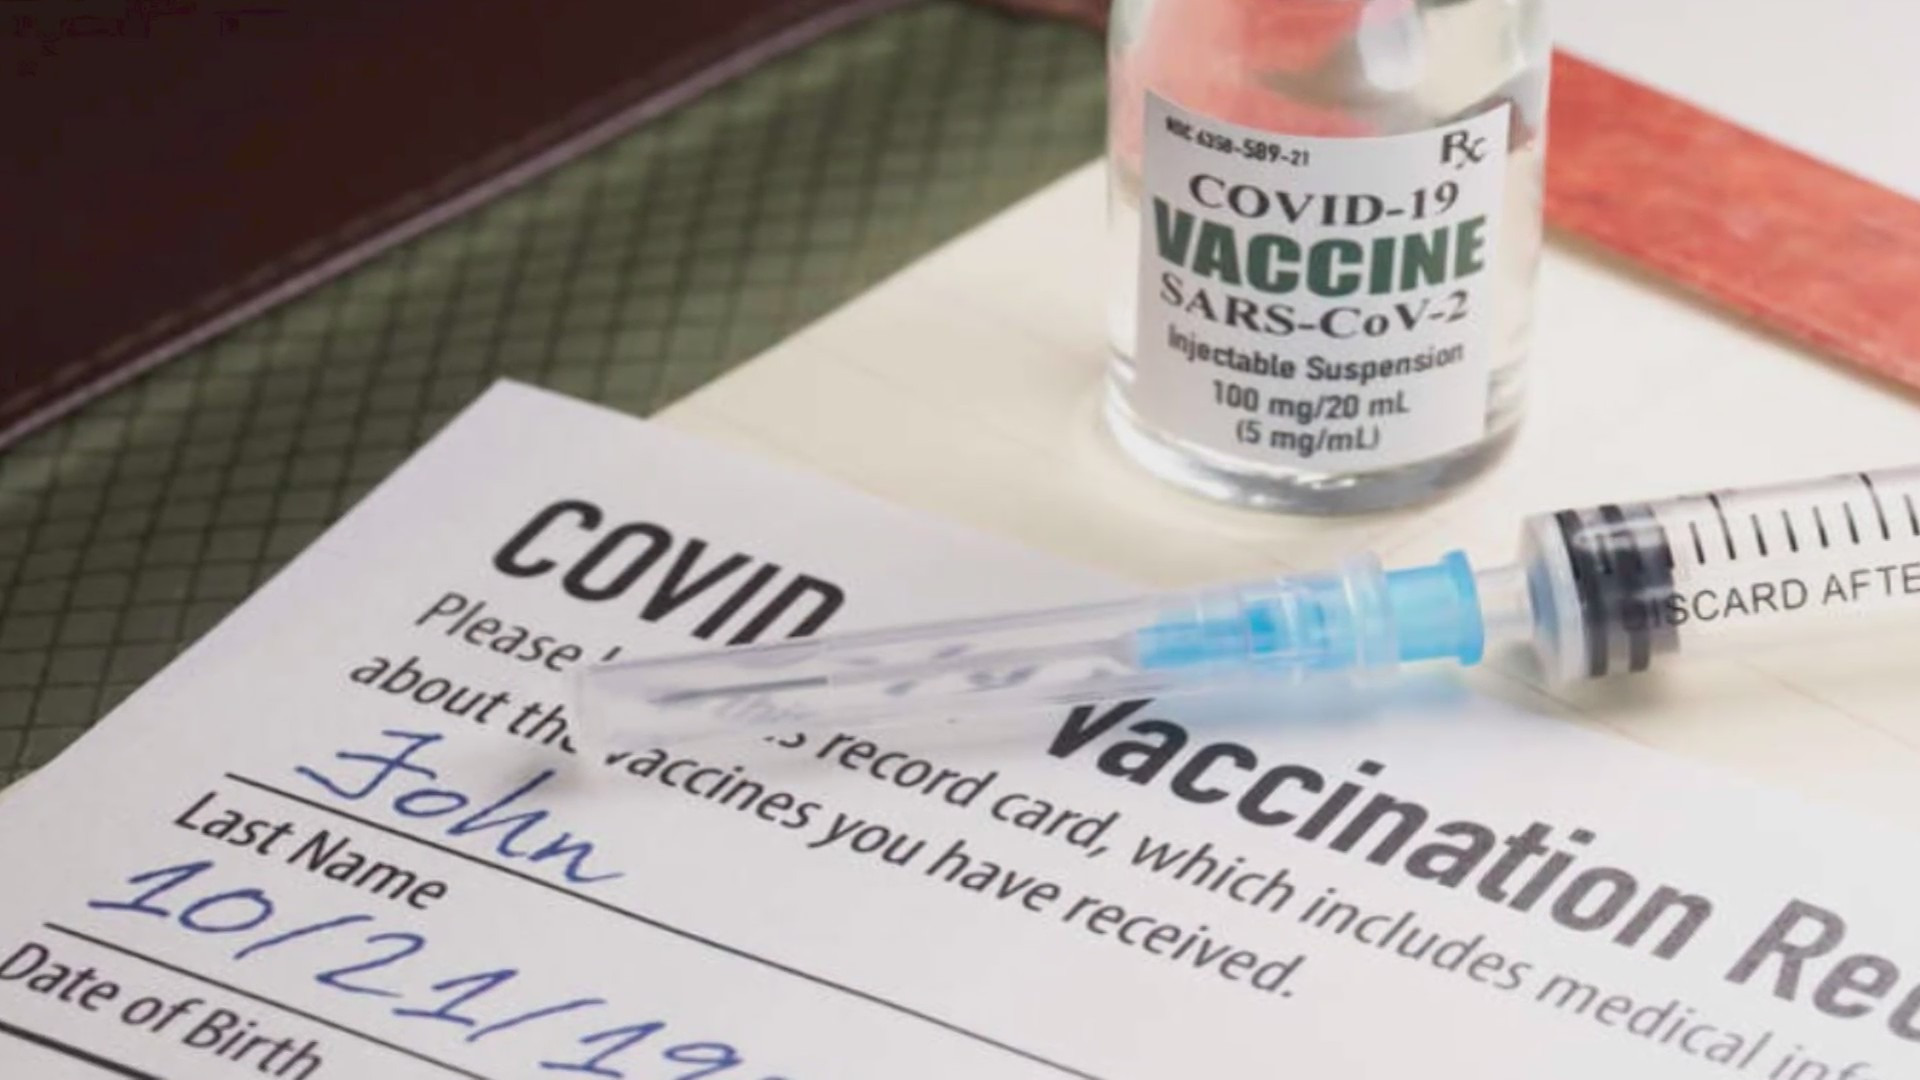 You are currently viewing COVID-19 Vaccination Card Scams, Attorney General Warns About